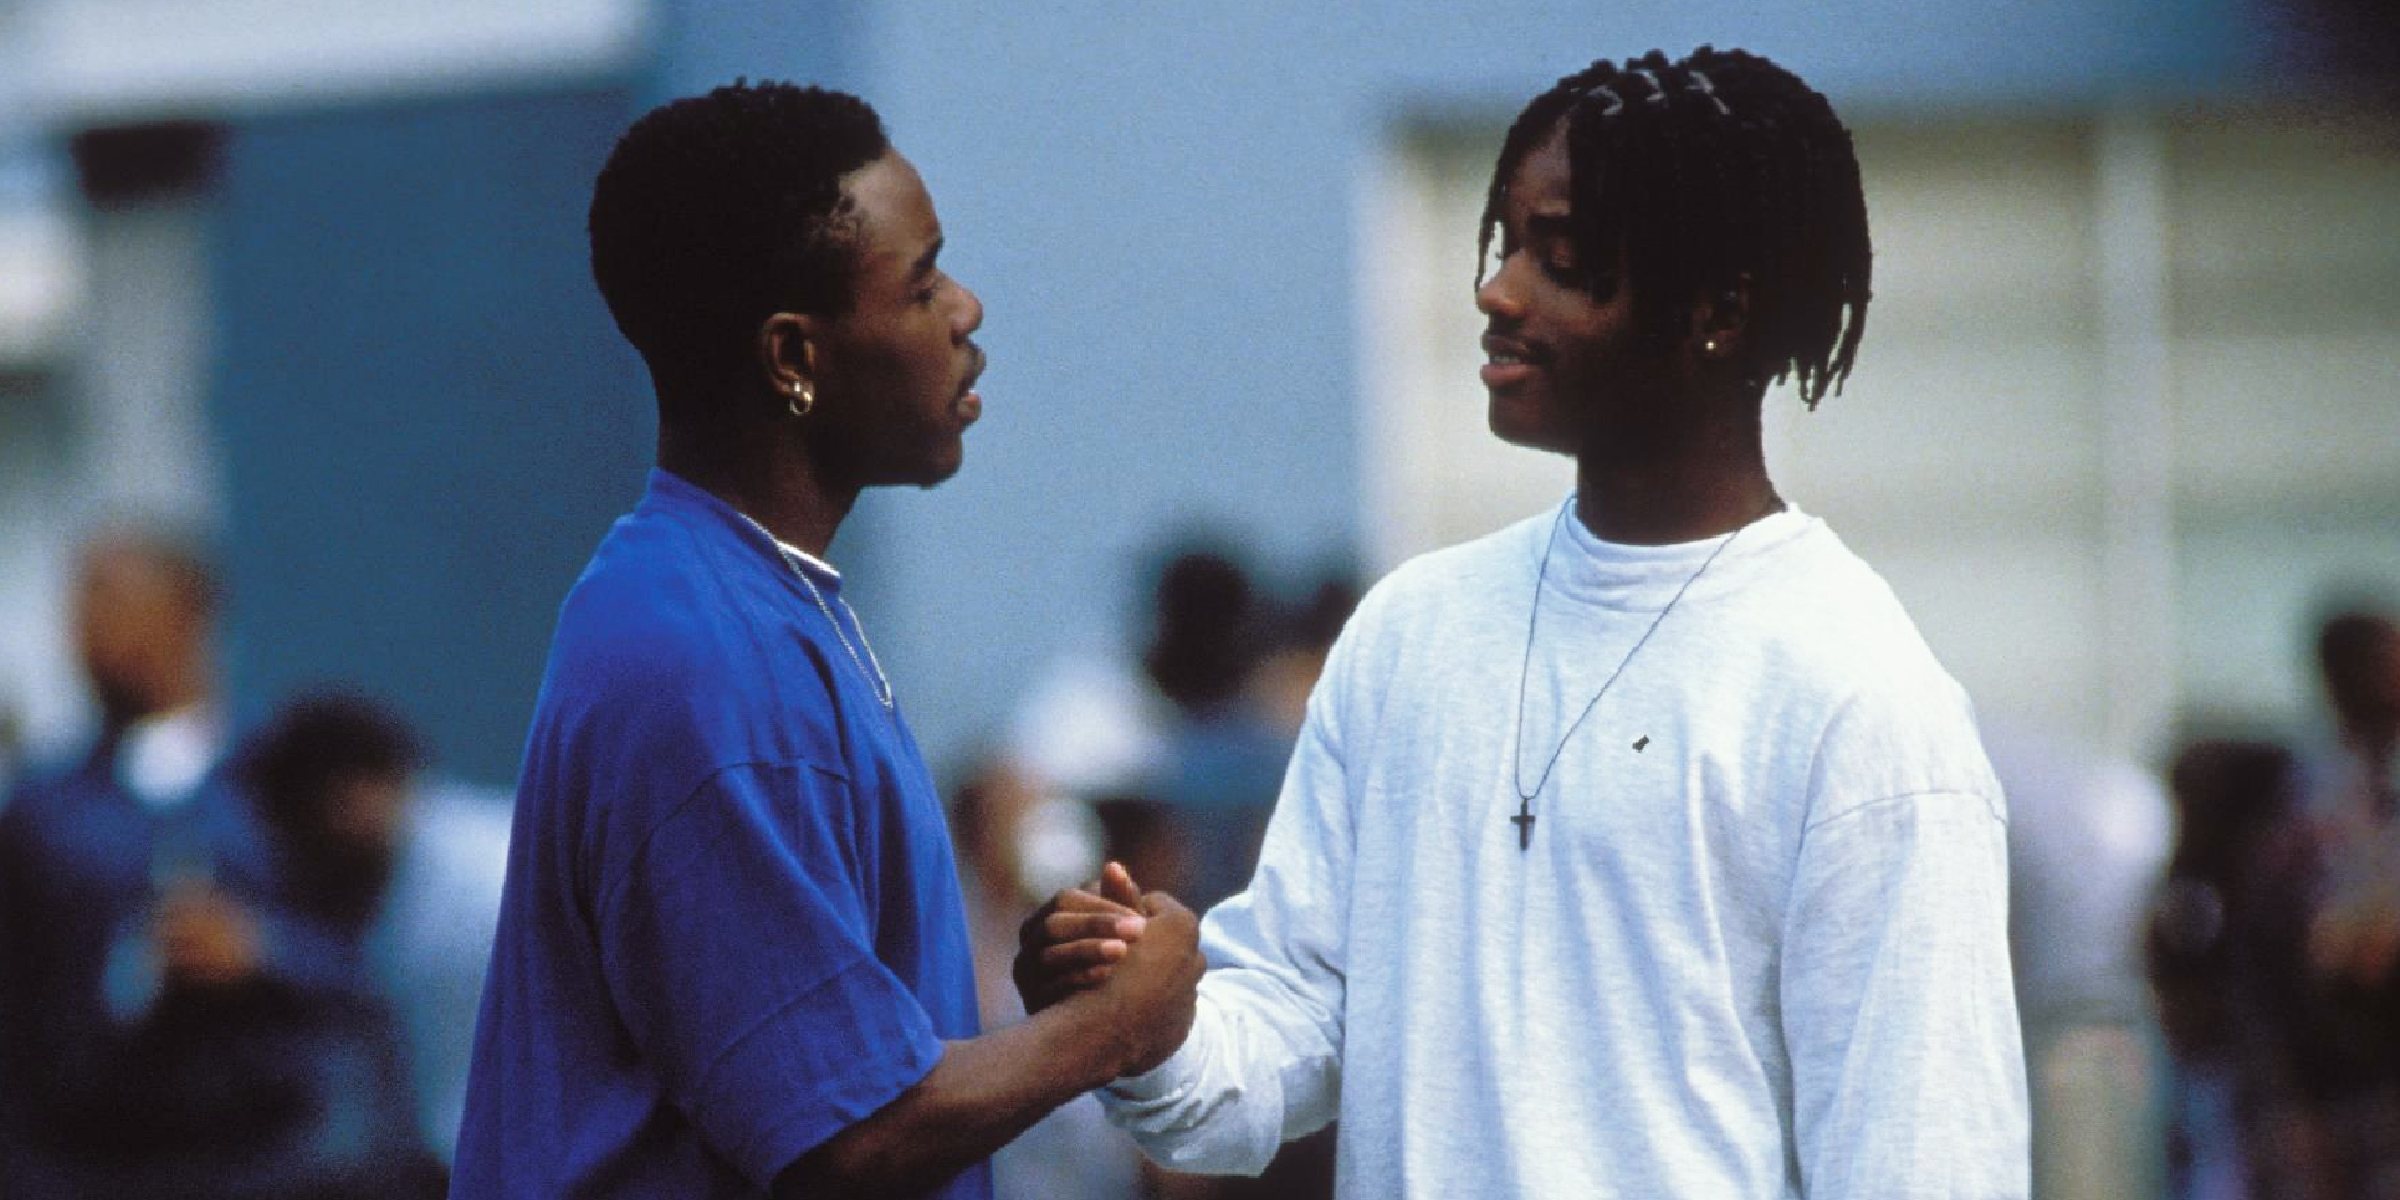 A scene from "Menace II Society" | Source: facebook.com/menaceiisocietyofficial